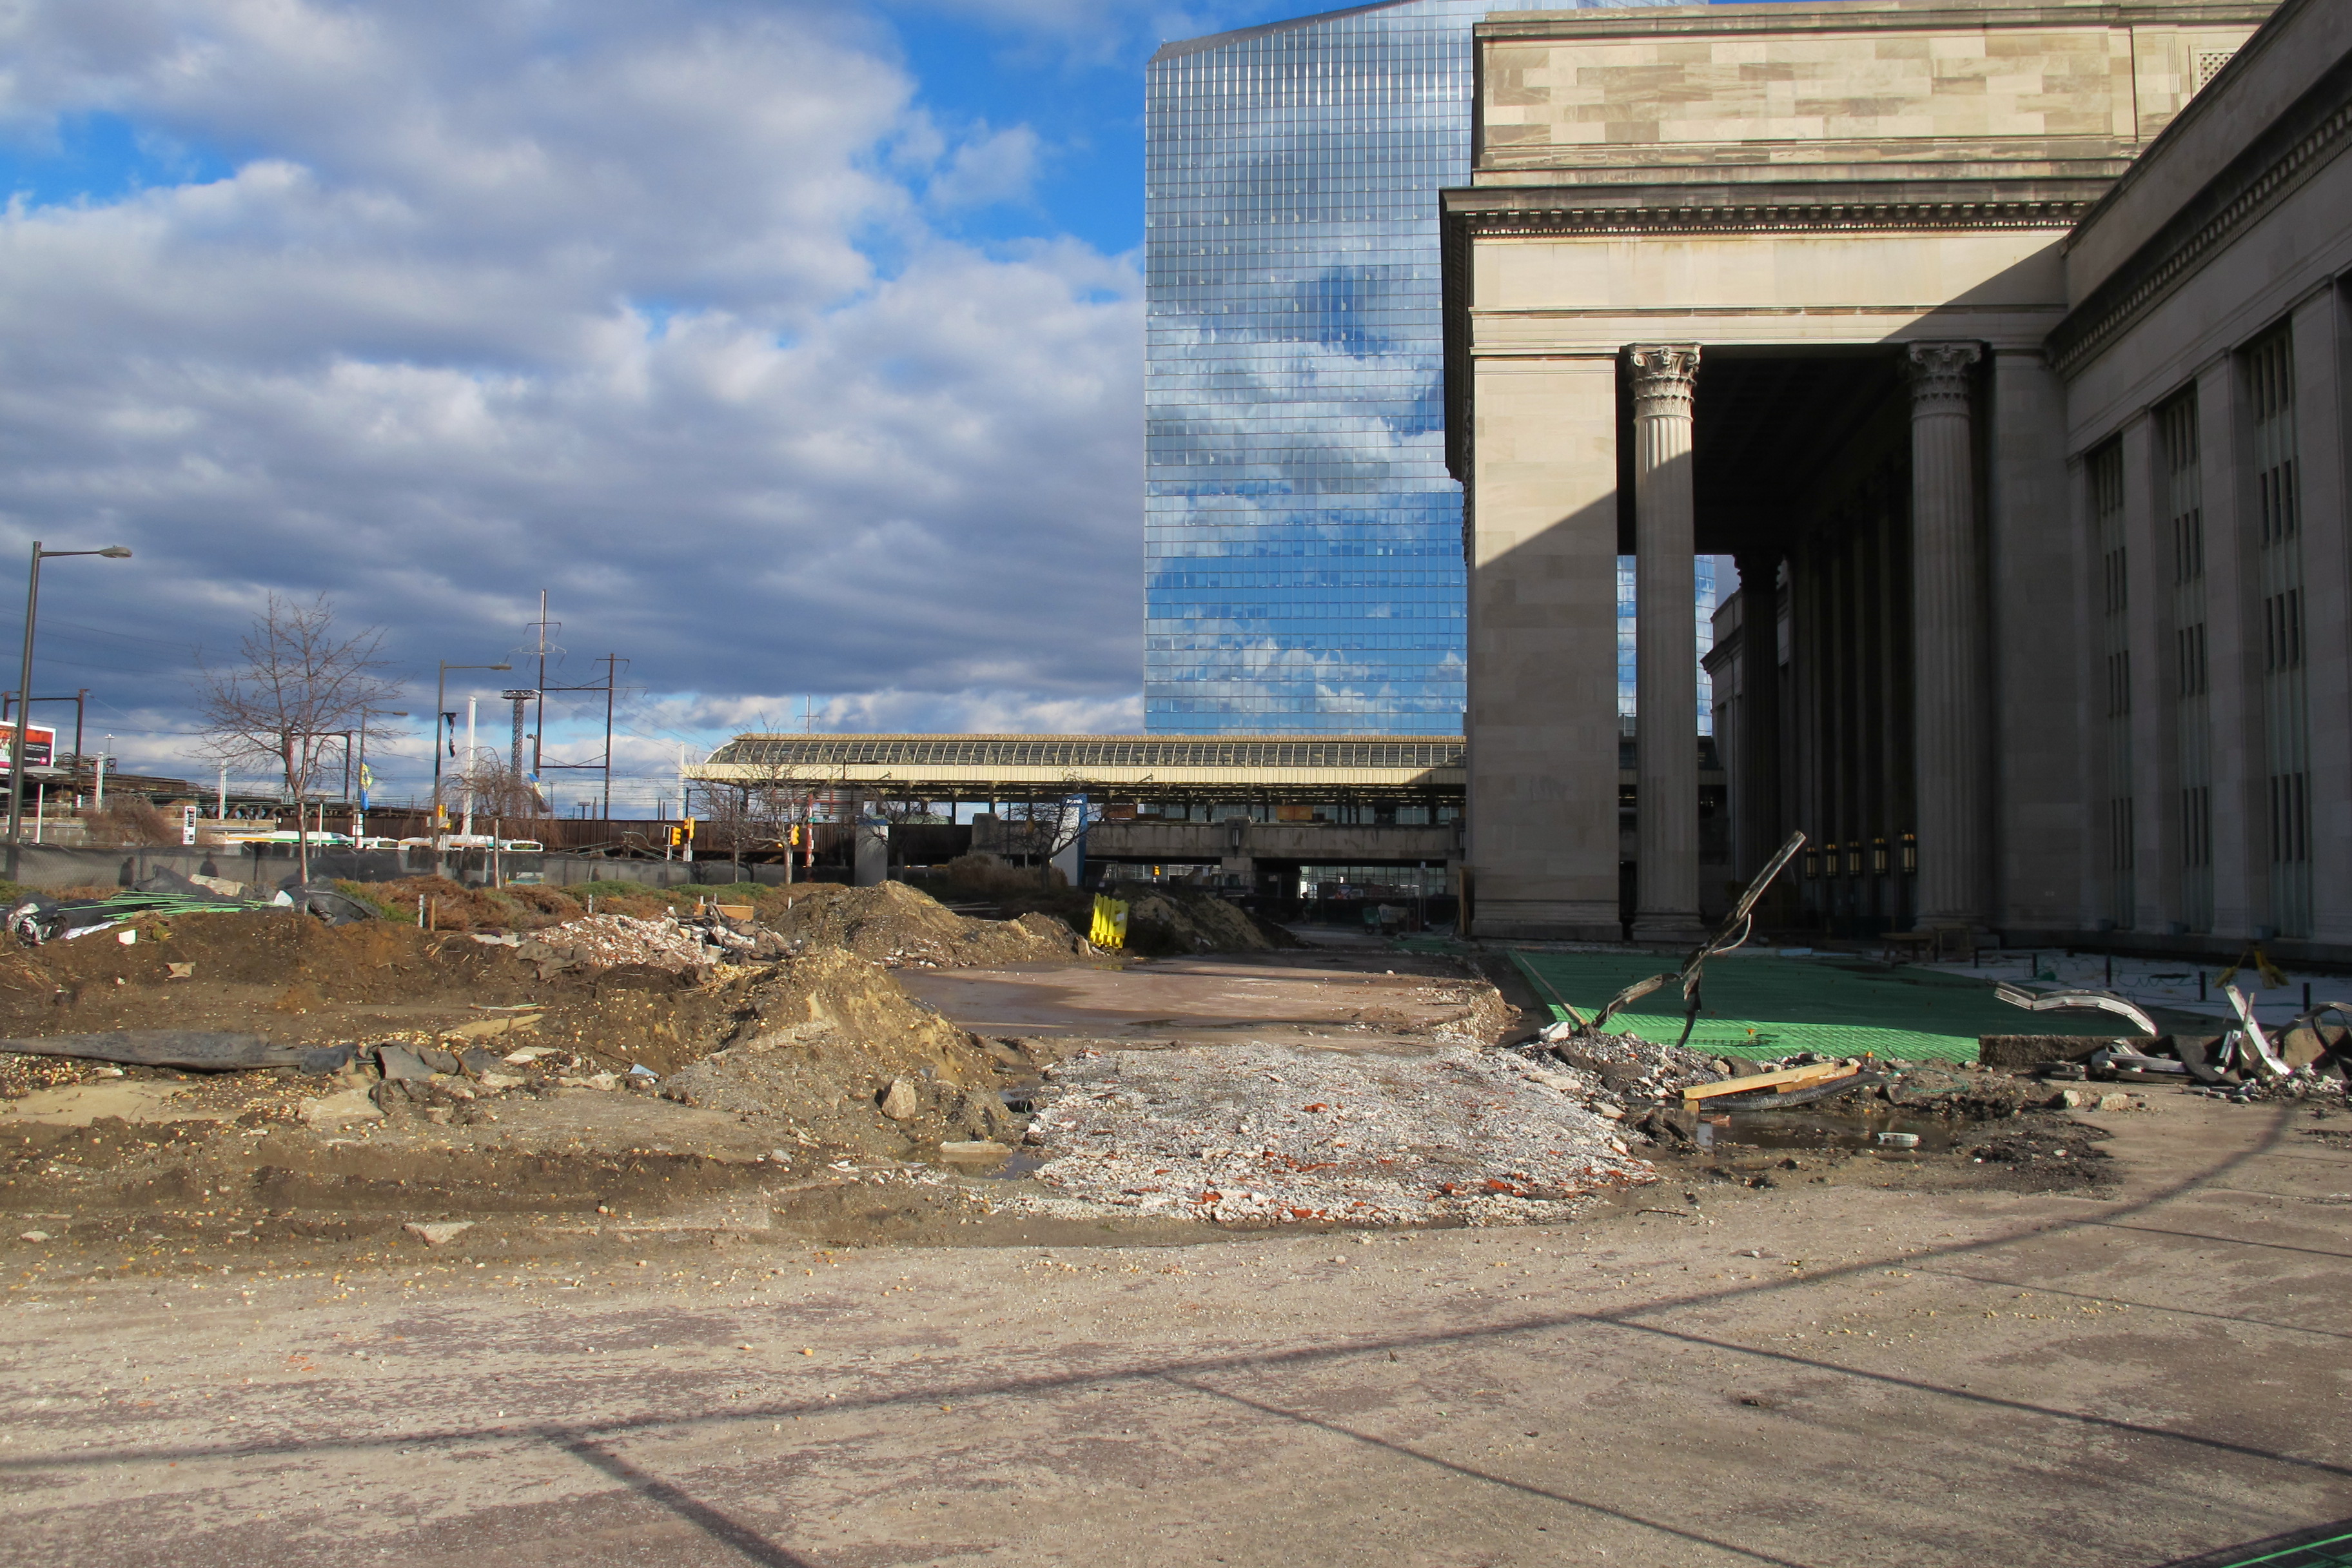 Construction on 30th Street Station's western side. (Or, what's hiding behind that cool looking fence.) January 2013.